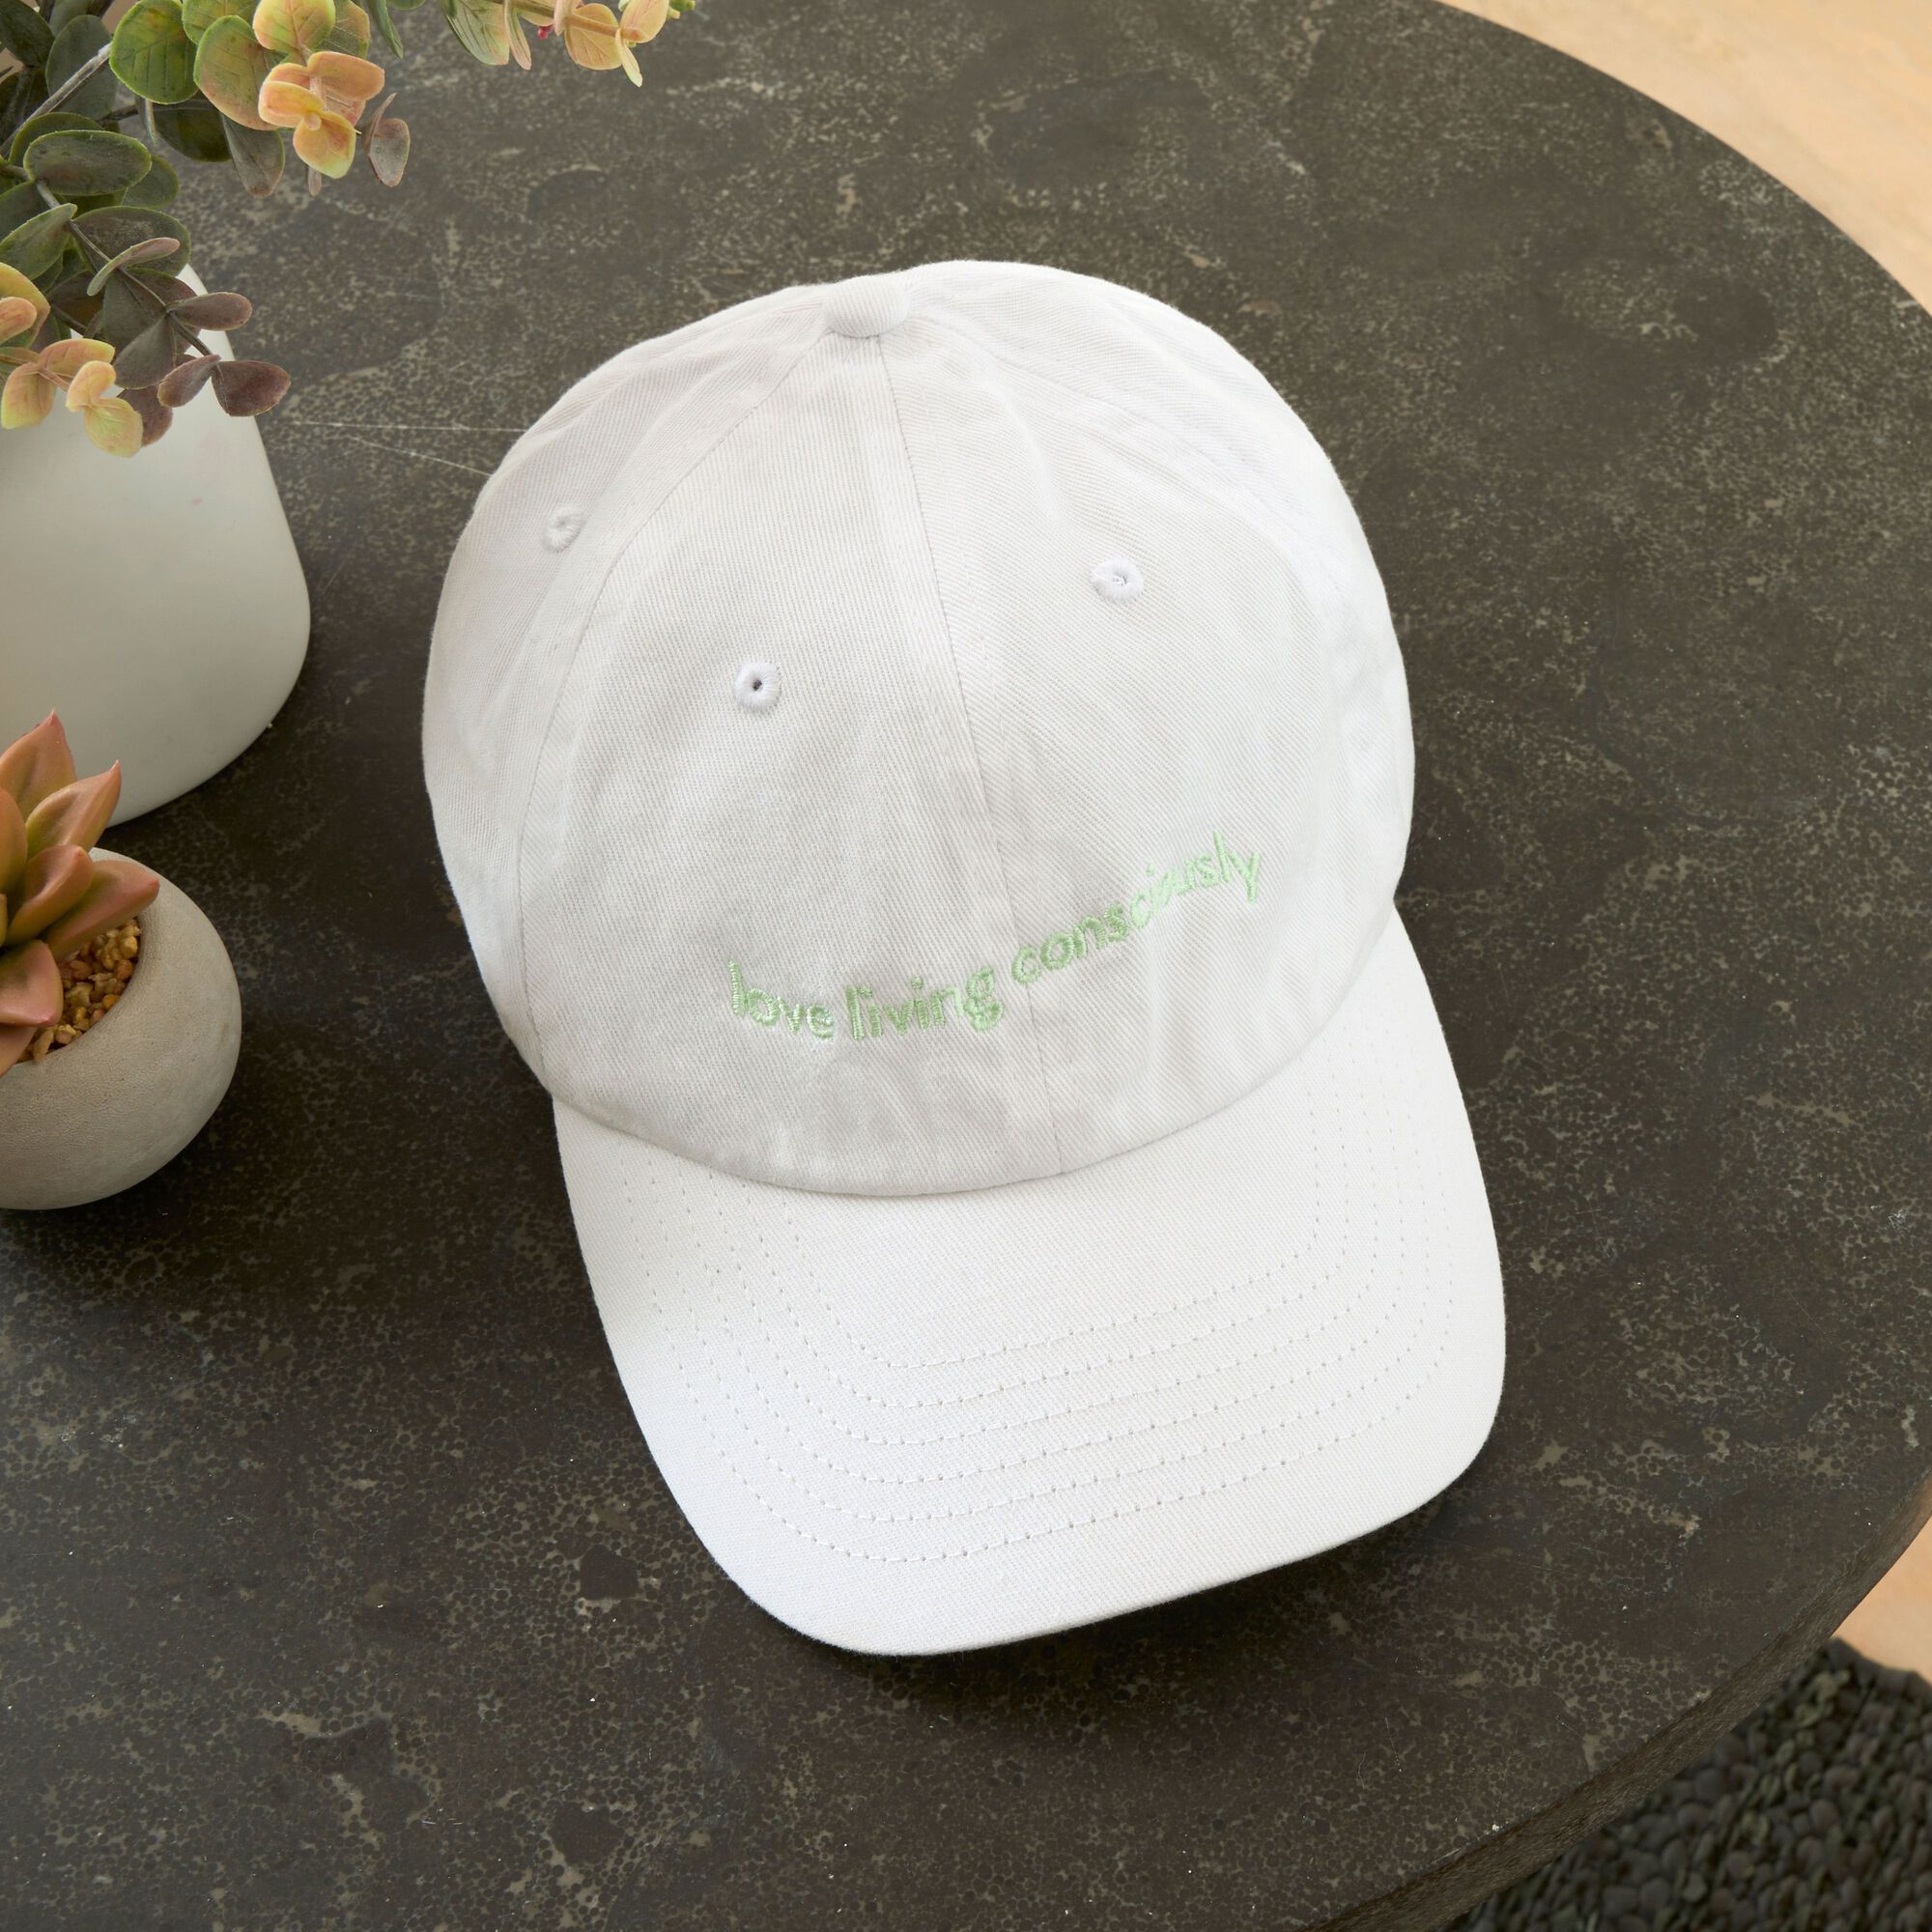 Conscious Every Day Cap, White